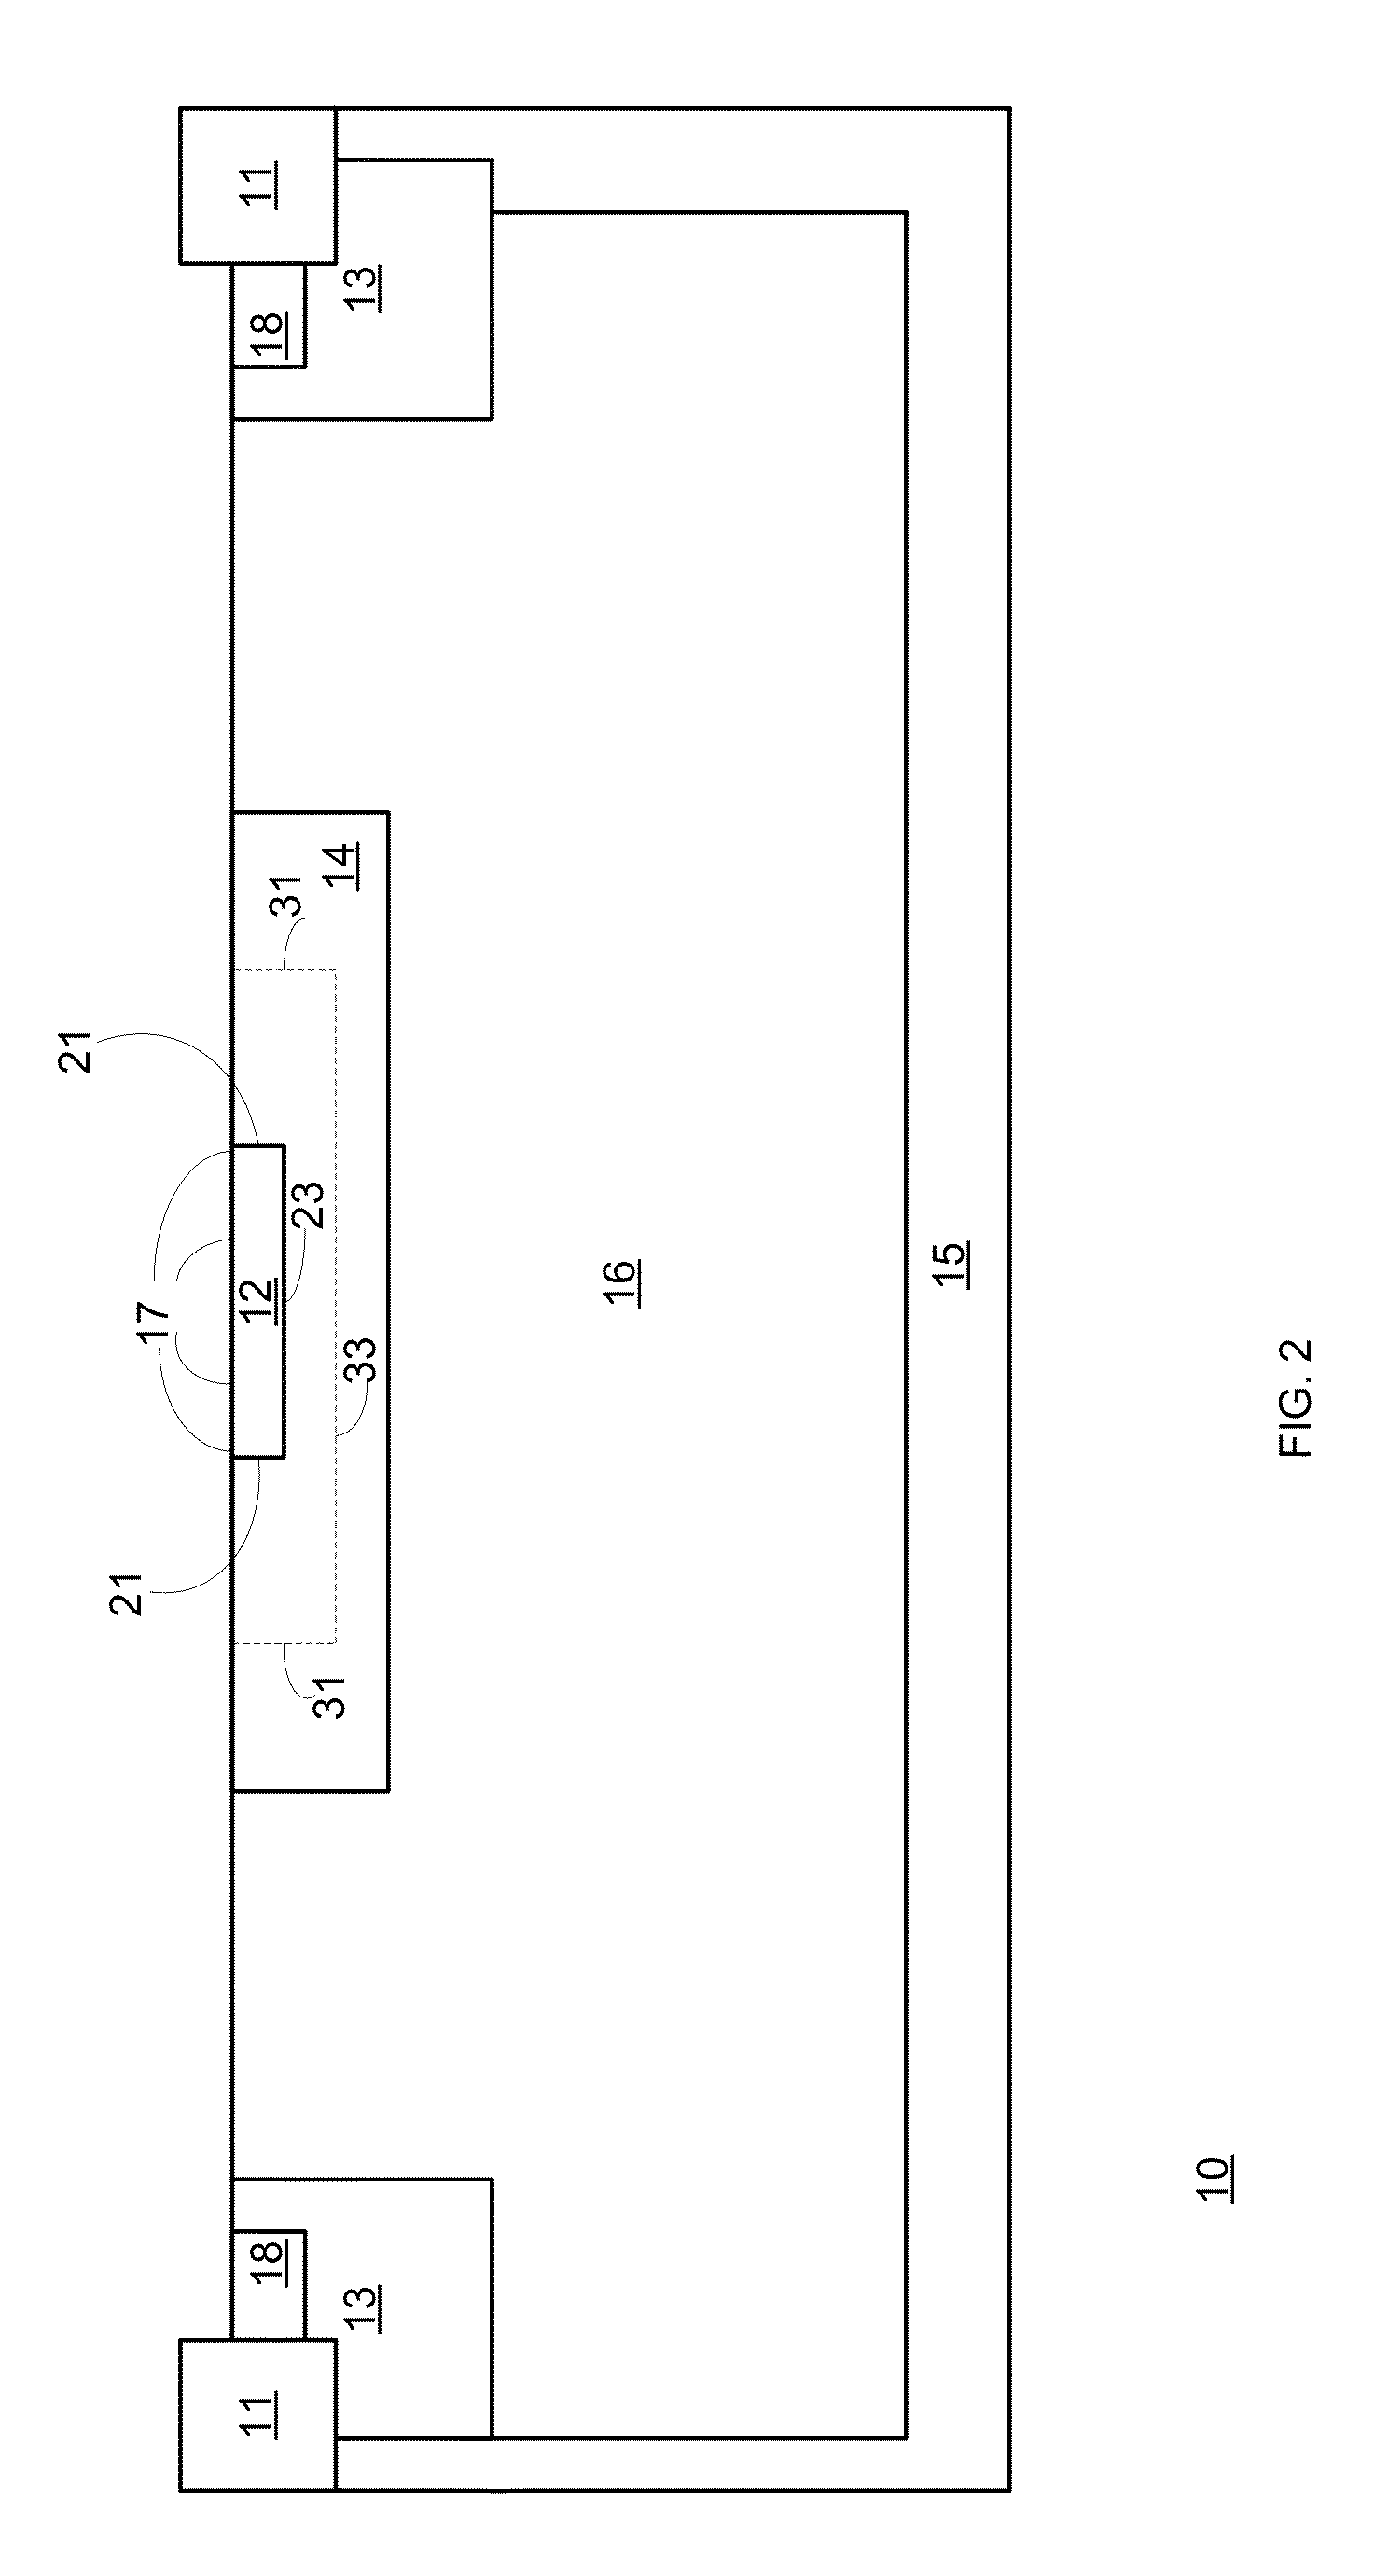 Device having an avalanche photo diode and a method for sensing photons